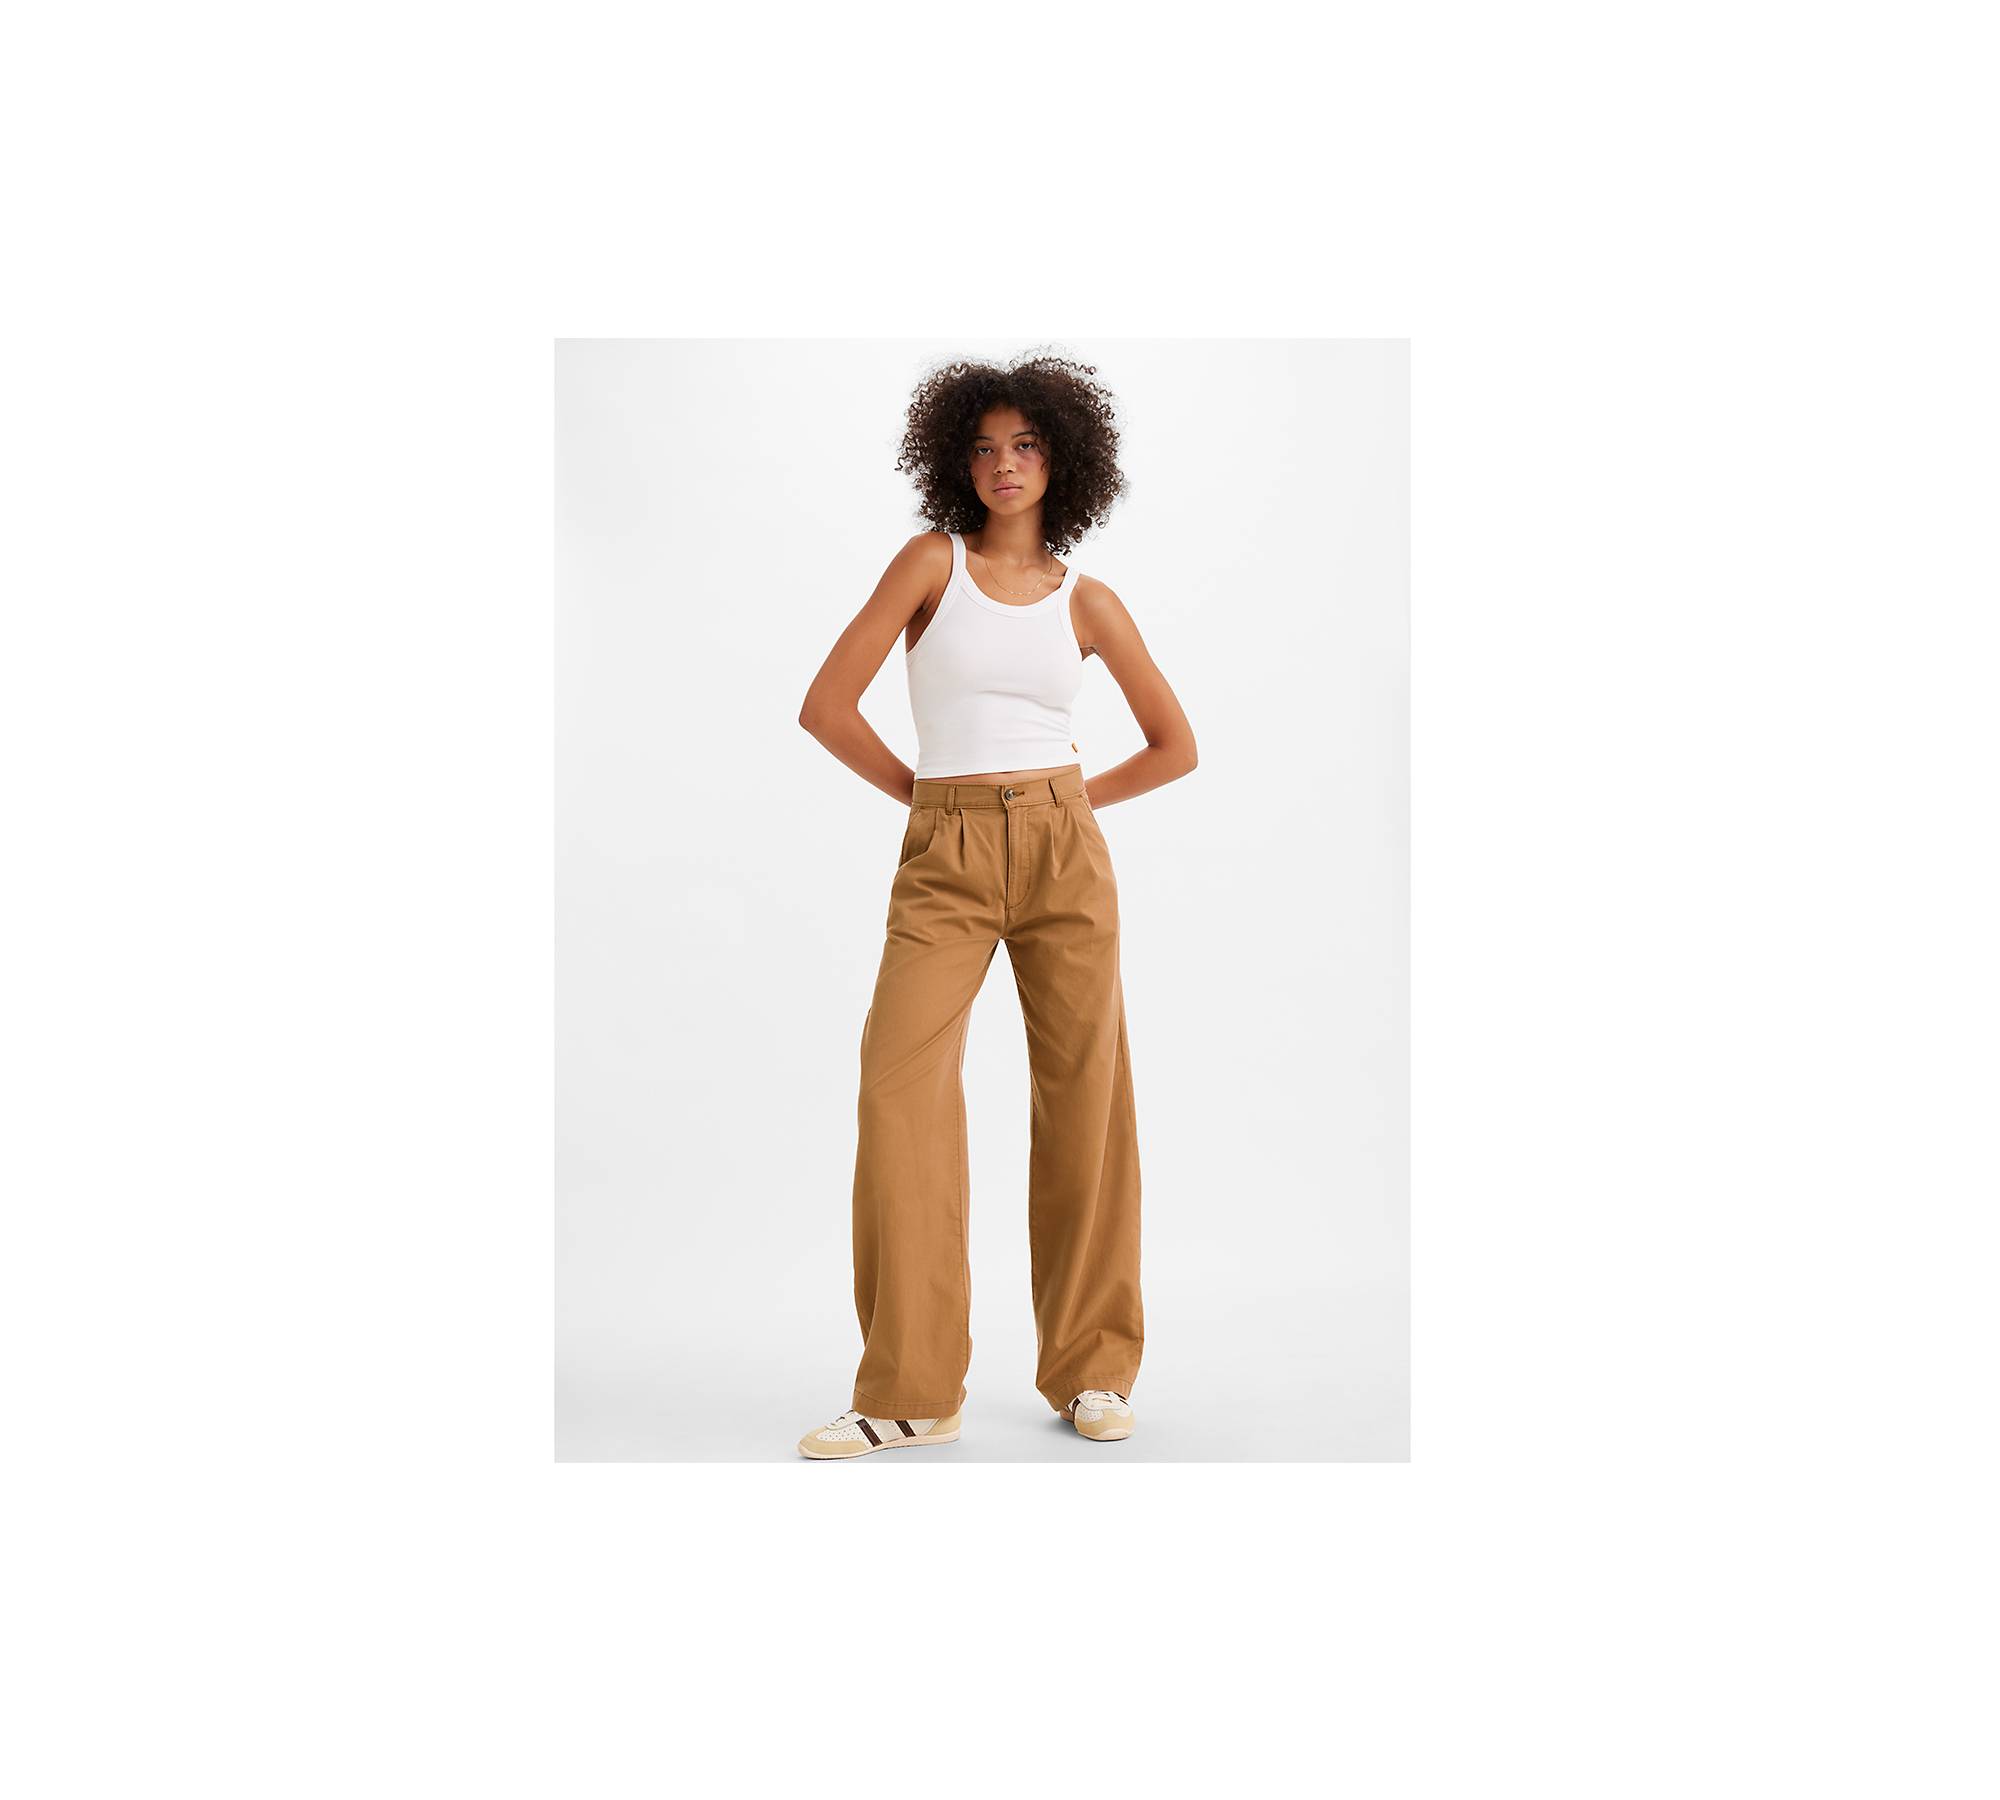 Women's High-Rise Pleat Front Straight Chino Pants - A New Day™ Brown 8